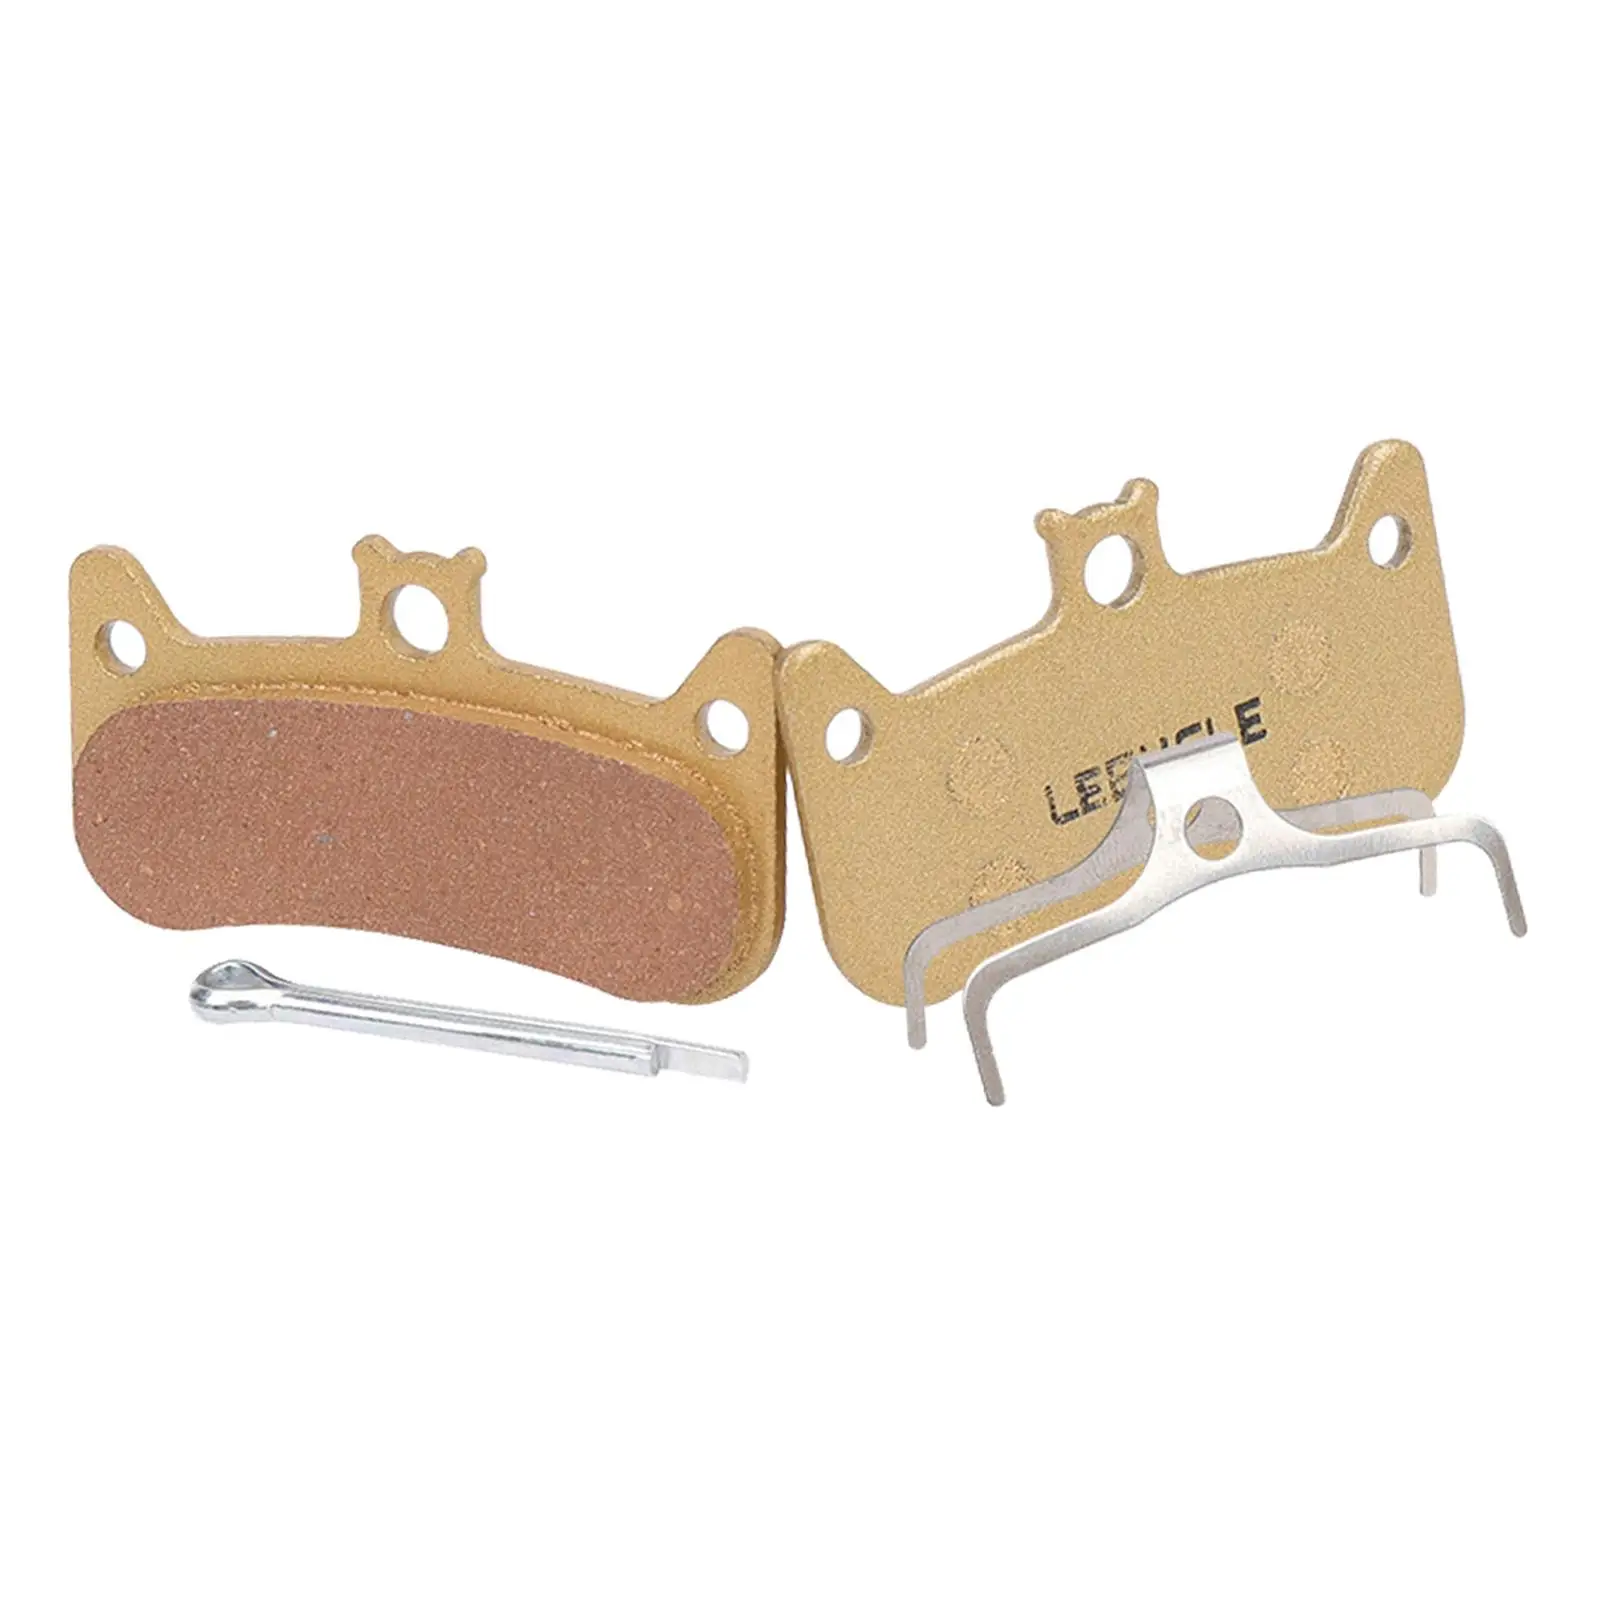 2x Bike Brake Pads Modification Accessories Easy to Mount Oil Disc Brake Pad